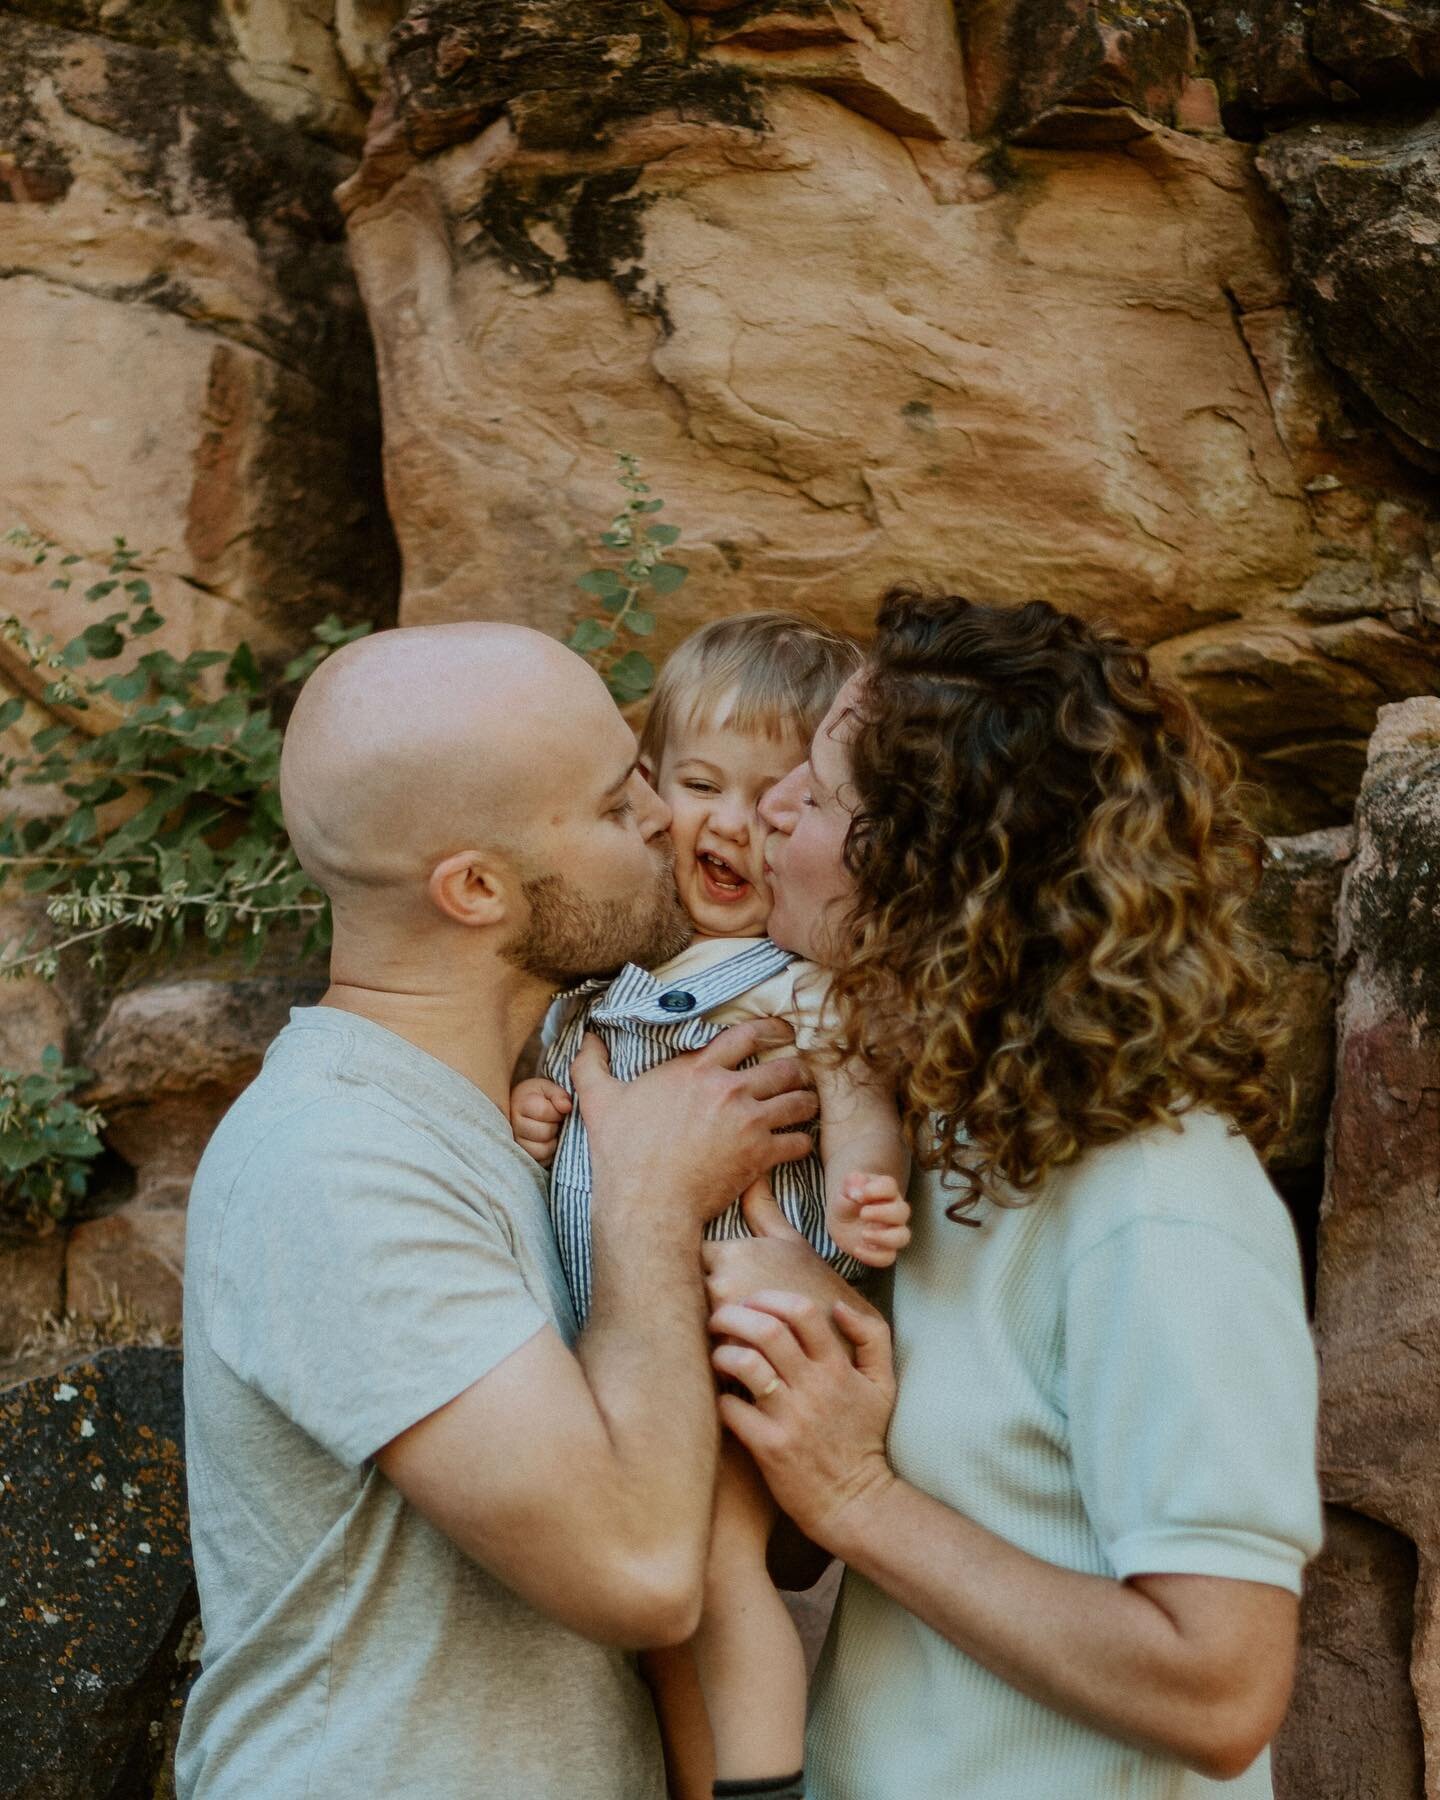 One of my absolute favorite prompts to do in family sessions is the &ldquo;squishy face.&rdquo; This adorable fam nailed it 👍🏼
.
.
.
.
.
🏷 
#familyphotography #familyphotos #familyphotoshoot #familyphotographer #coloradofamilyphotographer #denverf